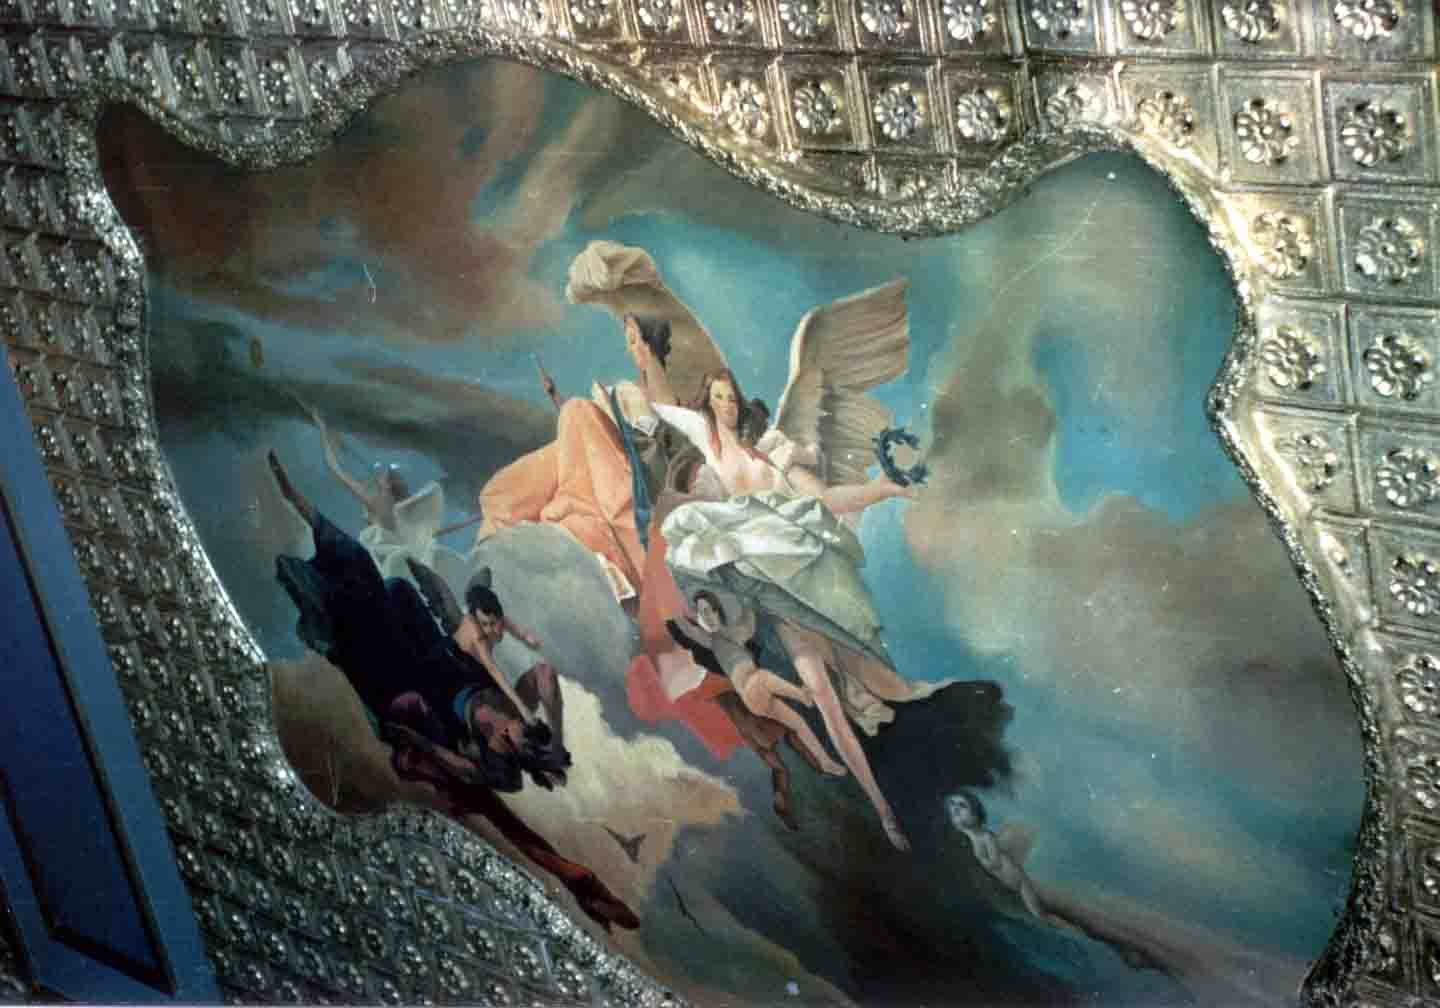 paintings on the ceiling